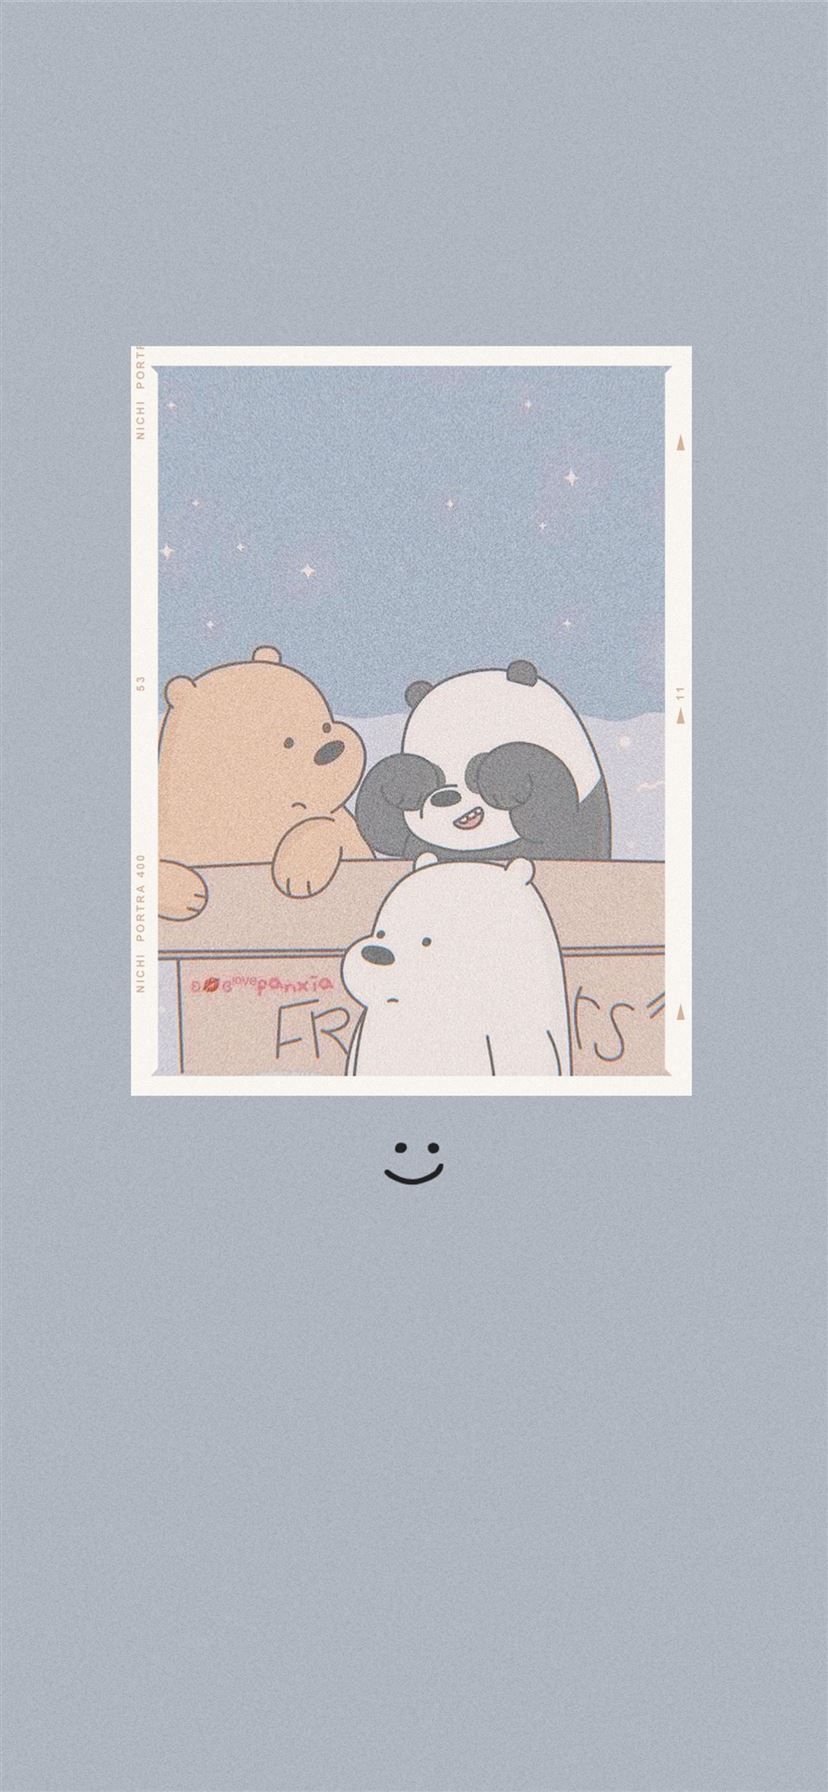 IPhone wallpaper of cartoon bears in a polaroid picture - We Bare Bears